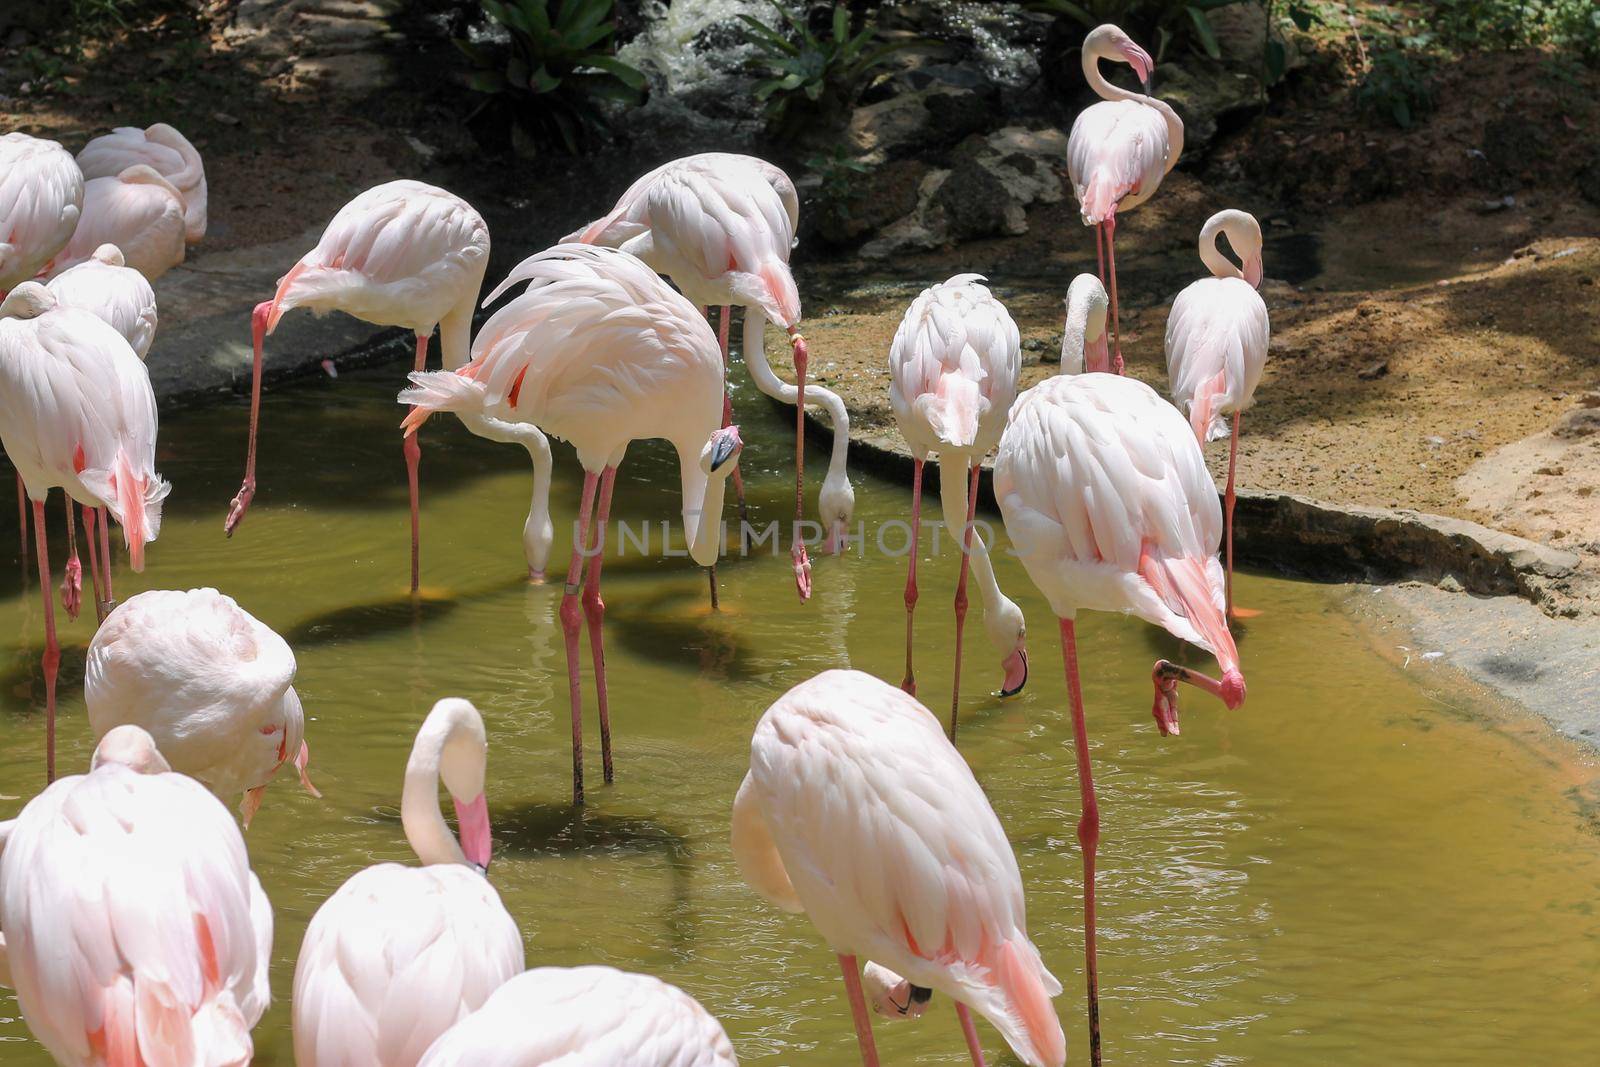 Flamingos in a pond in a zoo in Thailand intended for people to visit and gain knowledge about foreign animals by pichai25